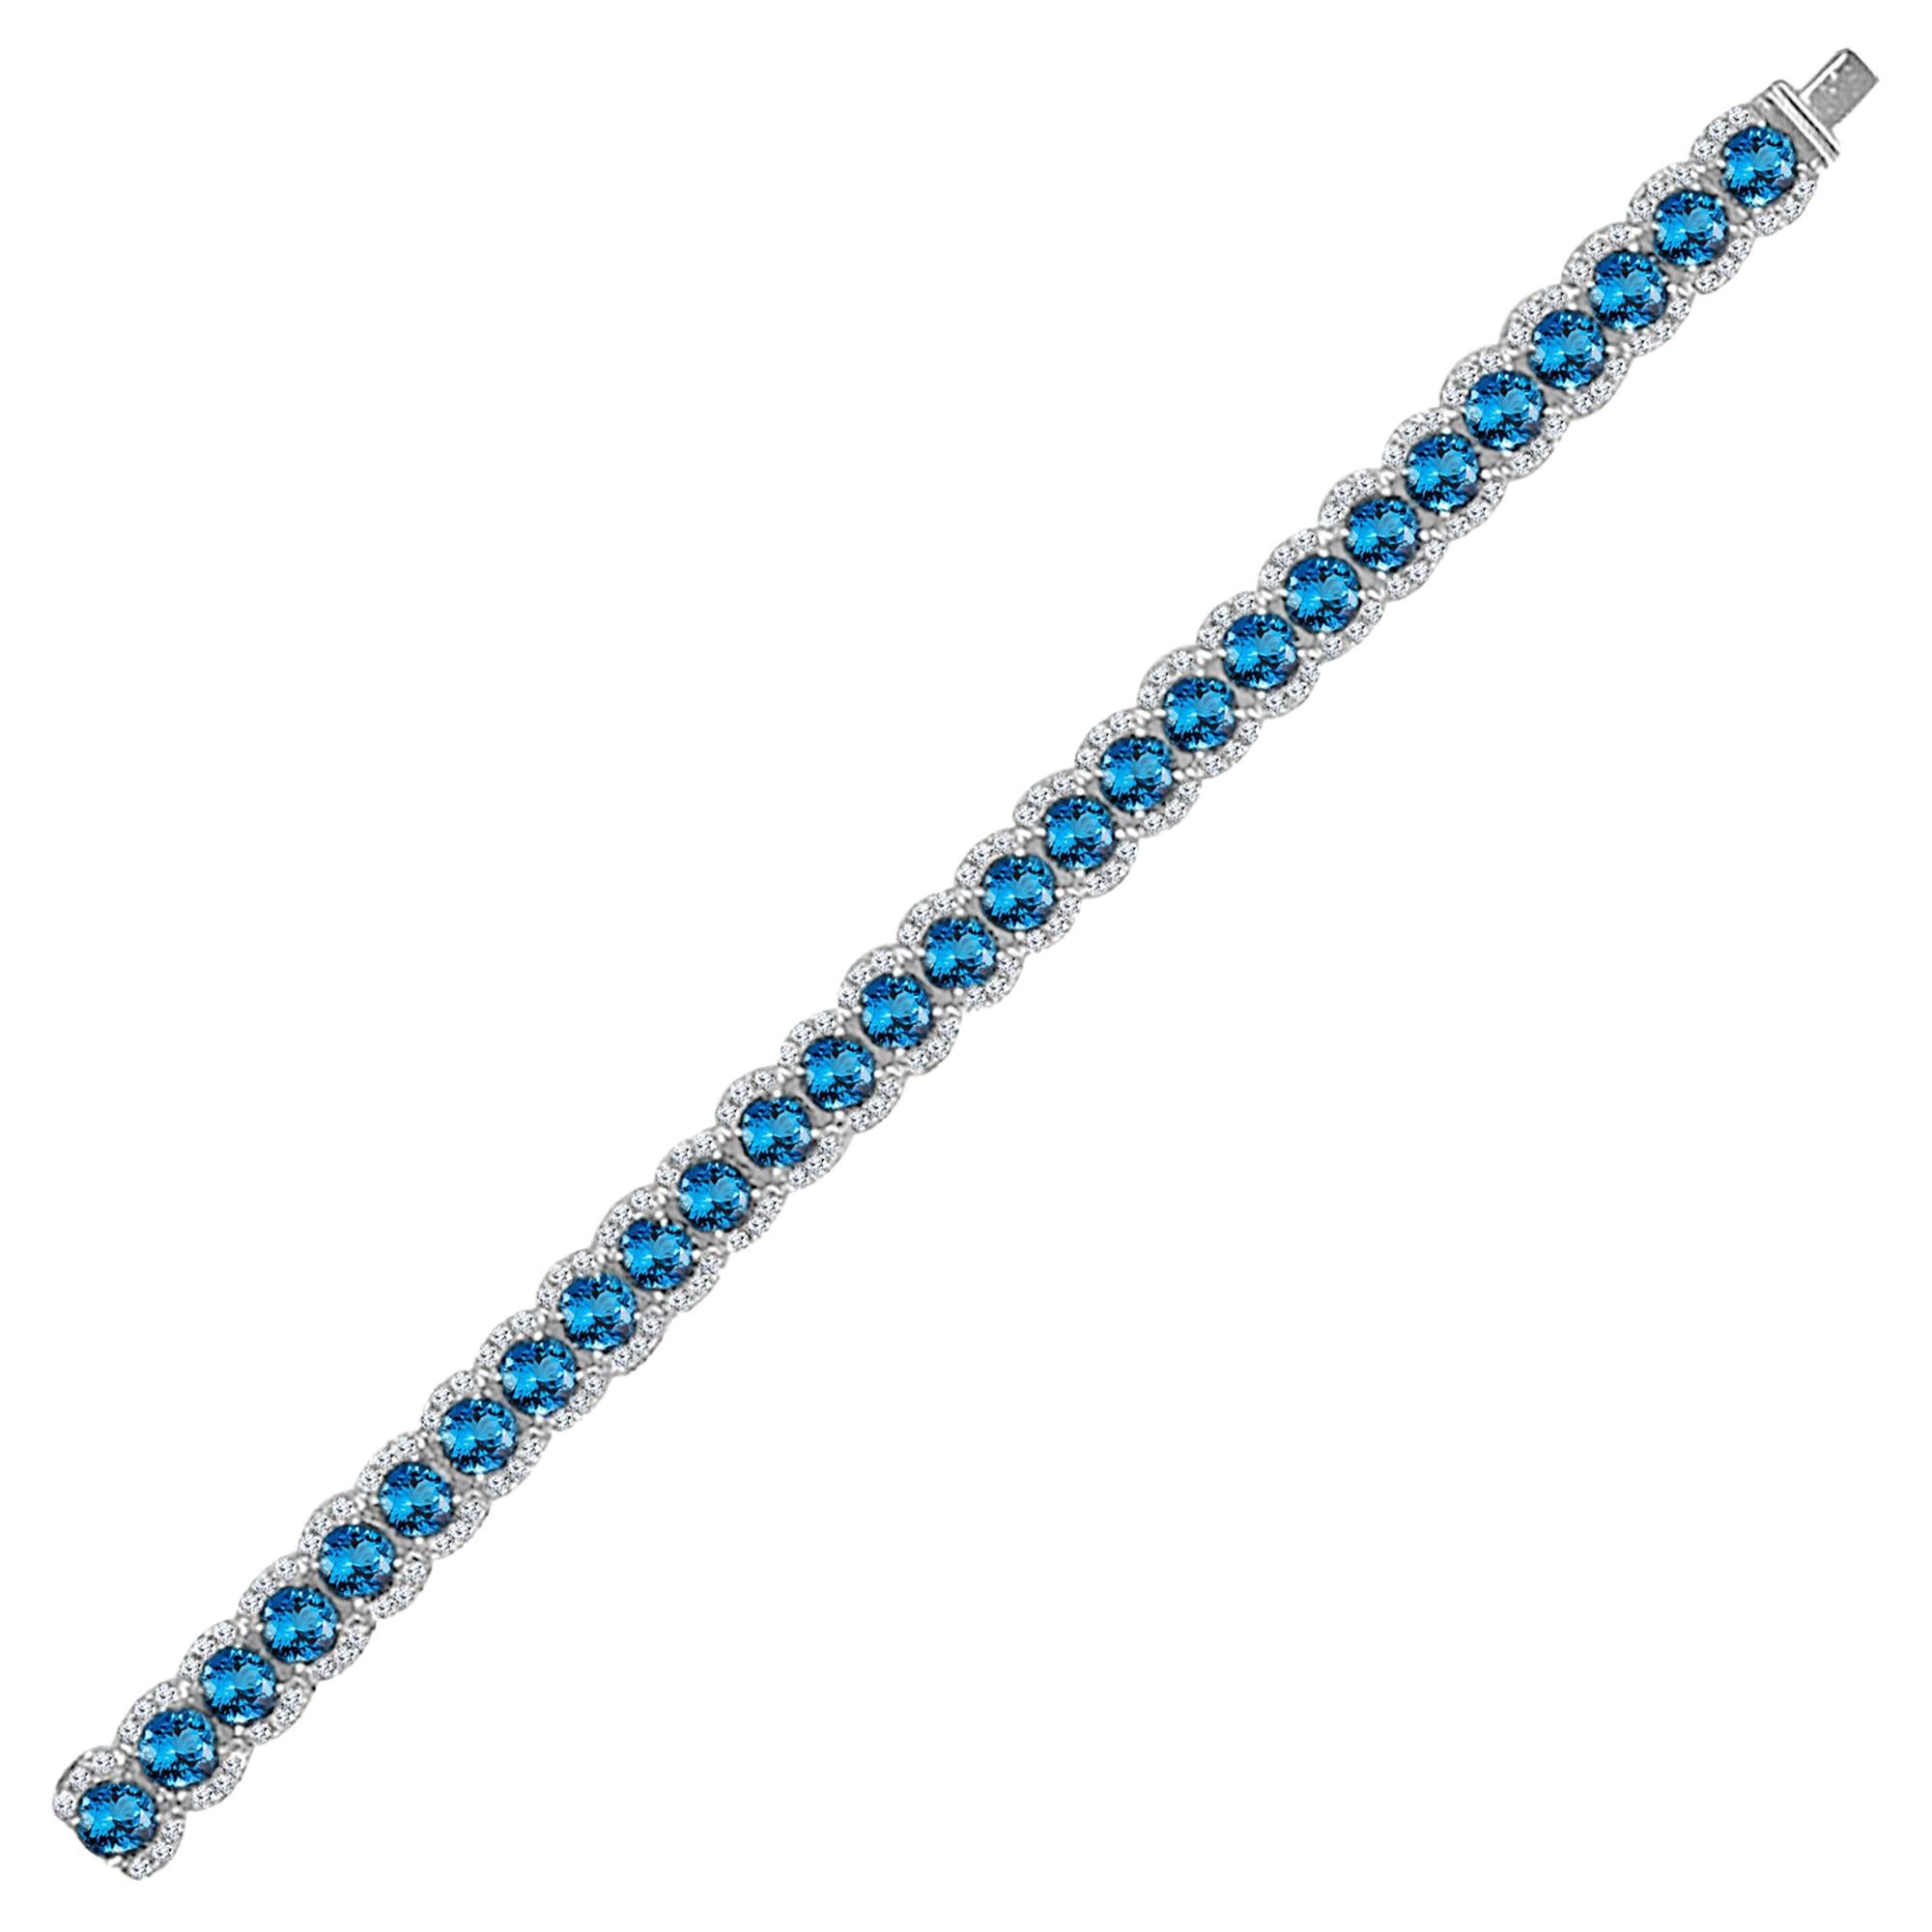 Elevate your look and embrace timeless beauty with this stunning bracelet., adorned with 28 mesmerizing Step Cut Blue Topaz gemstones, each weighing 3.10 carats, and gracefully accented by brilliant round natural diamonds. Crafted with precision,